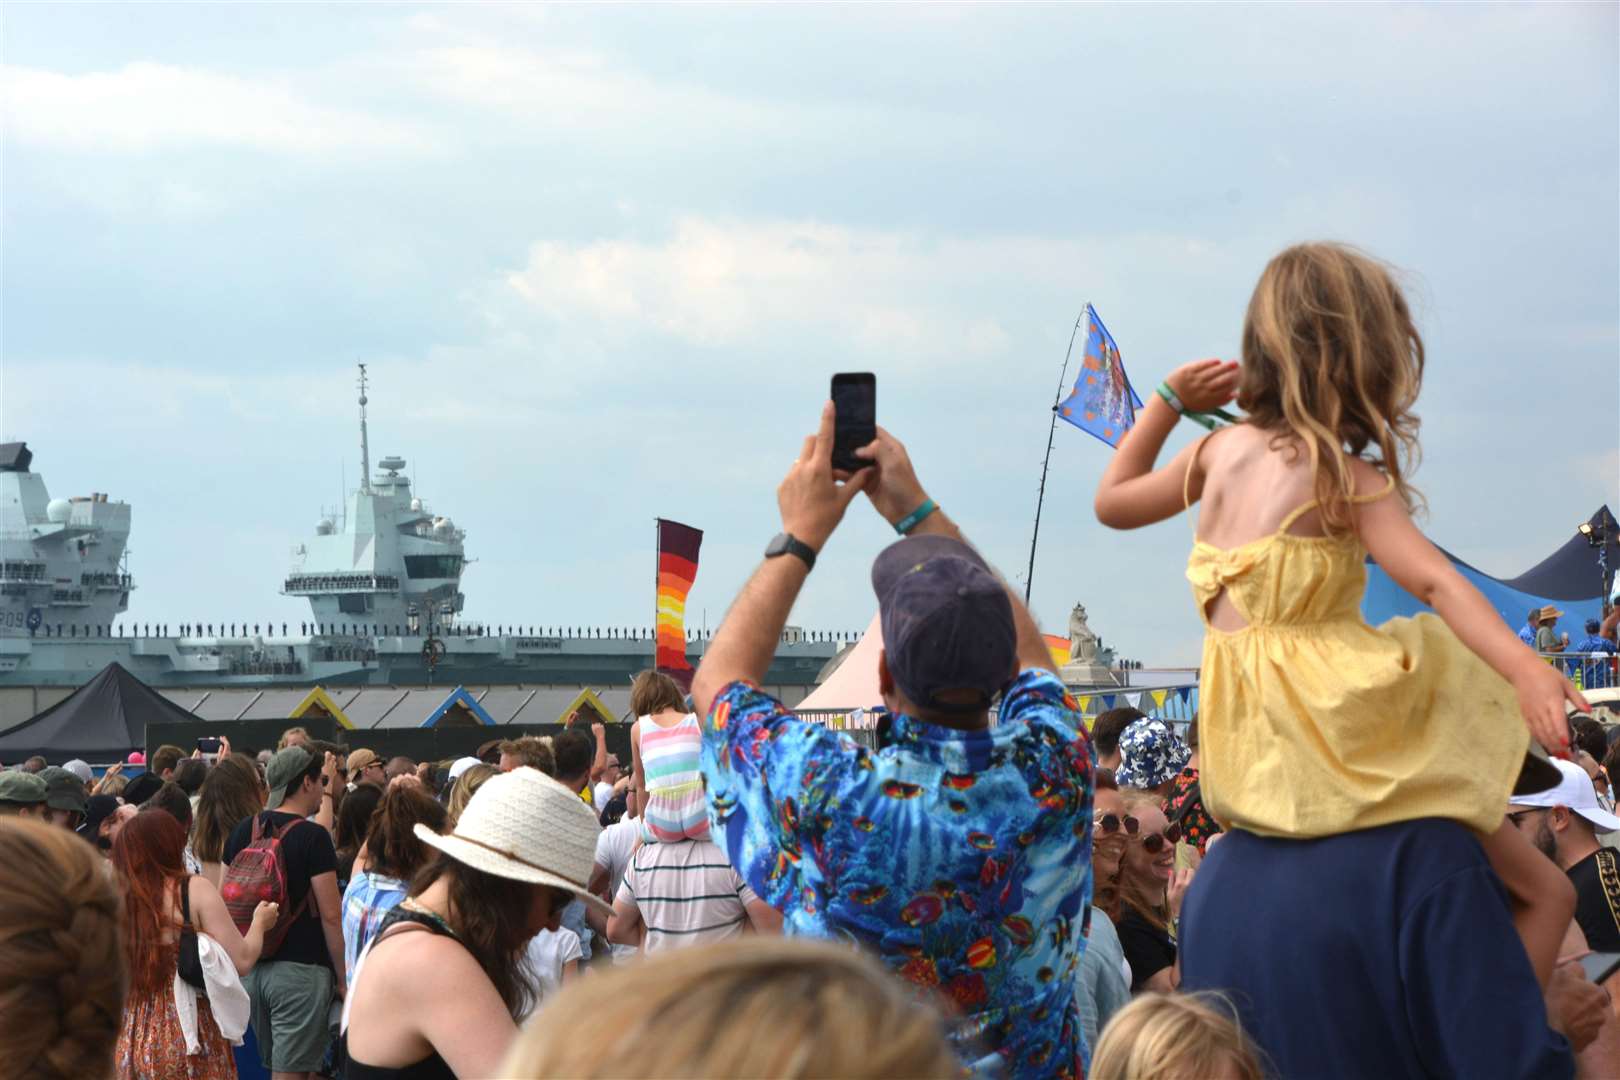 Festival goers at the Victorious Festival gave the carrier a colourful send-off on Saturday afternoon (Ben Mitchell/PA)